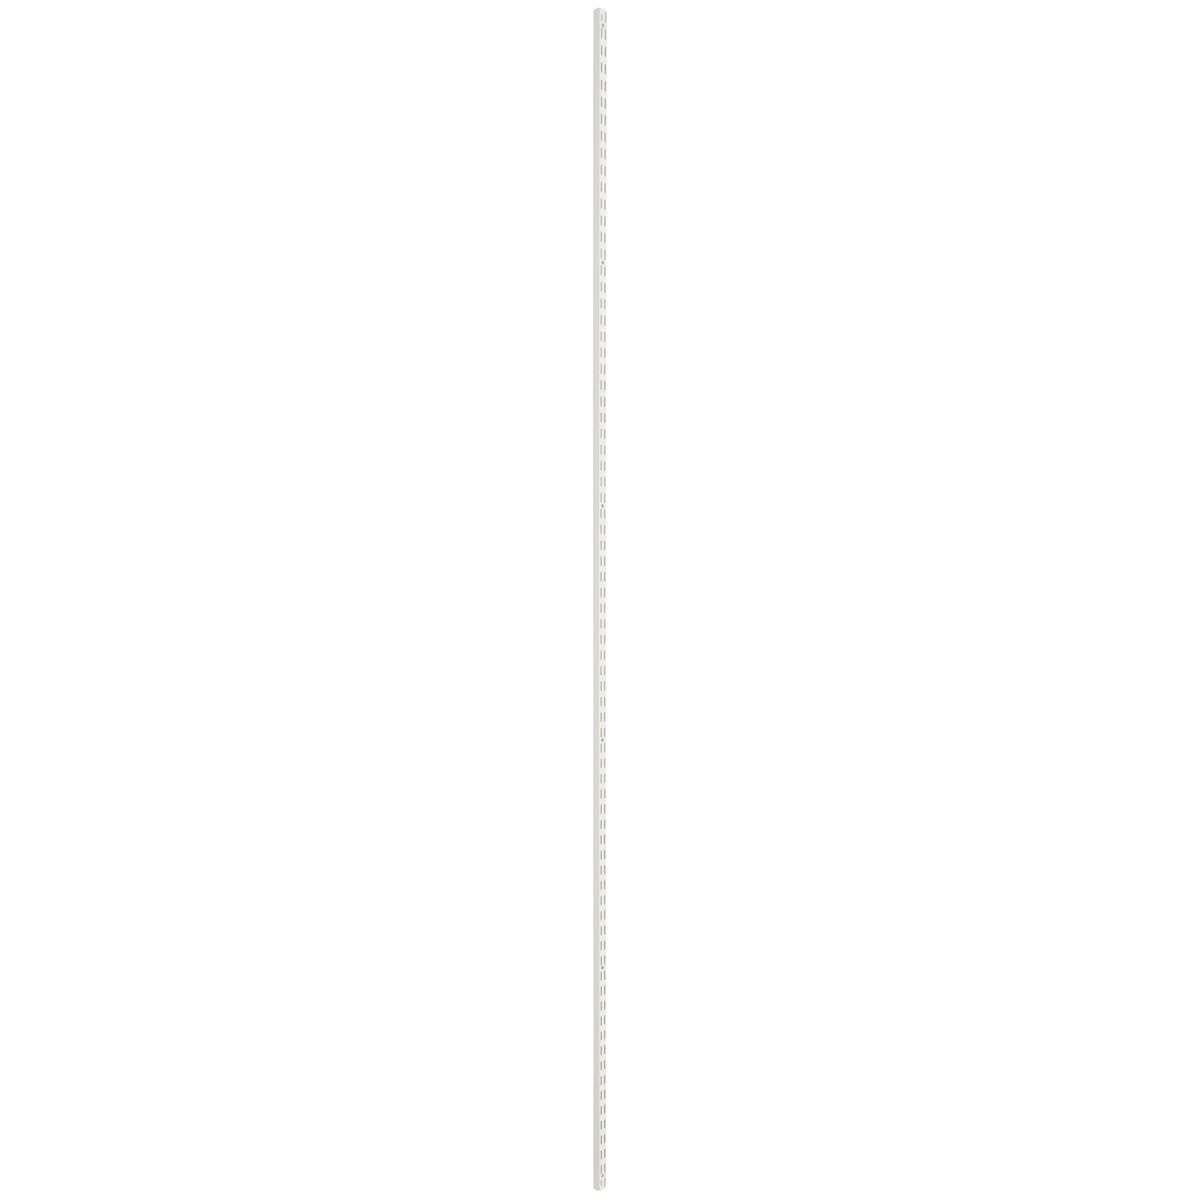 Elfa 94-5/16" Mounted Standard White | The Container Store